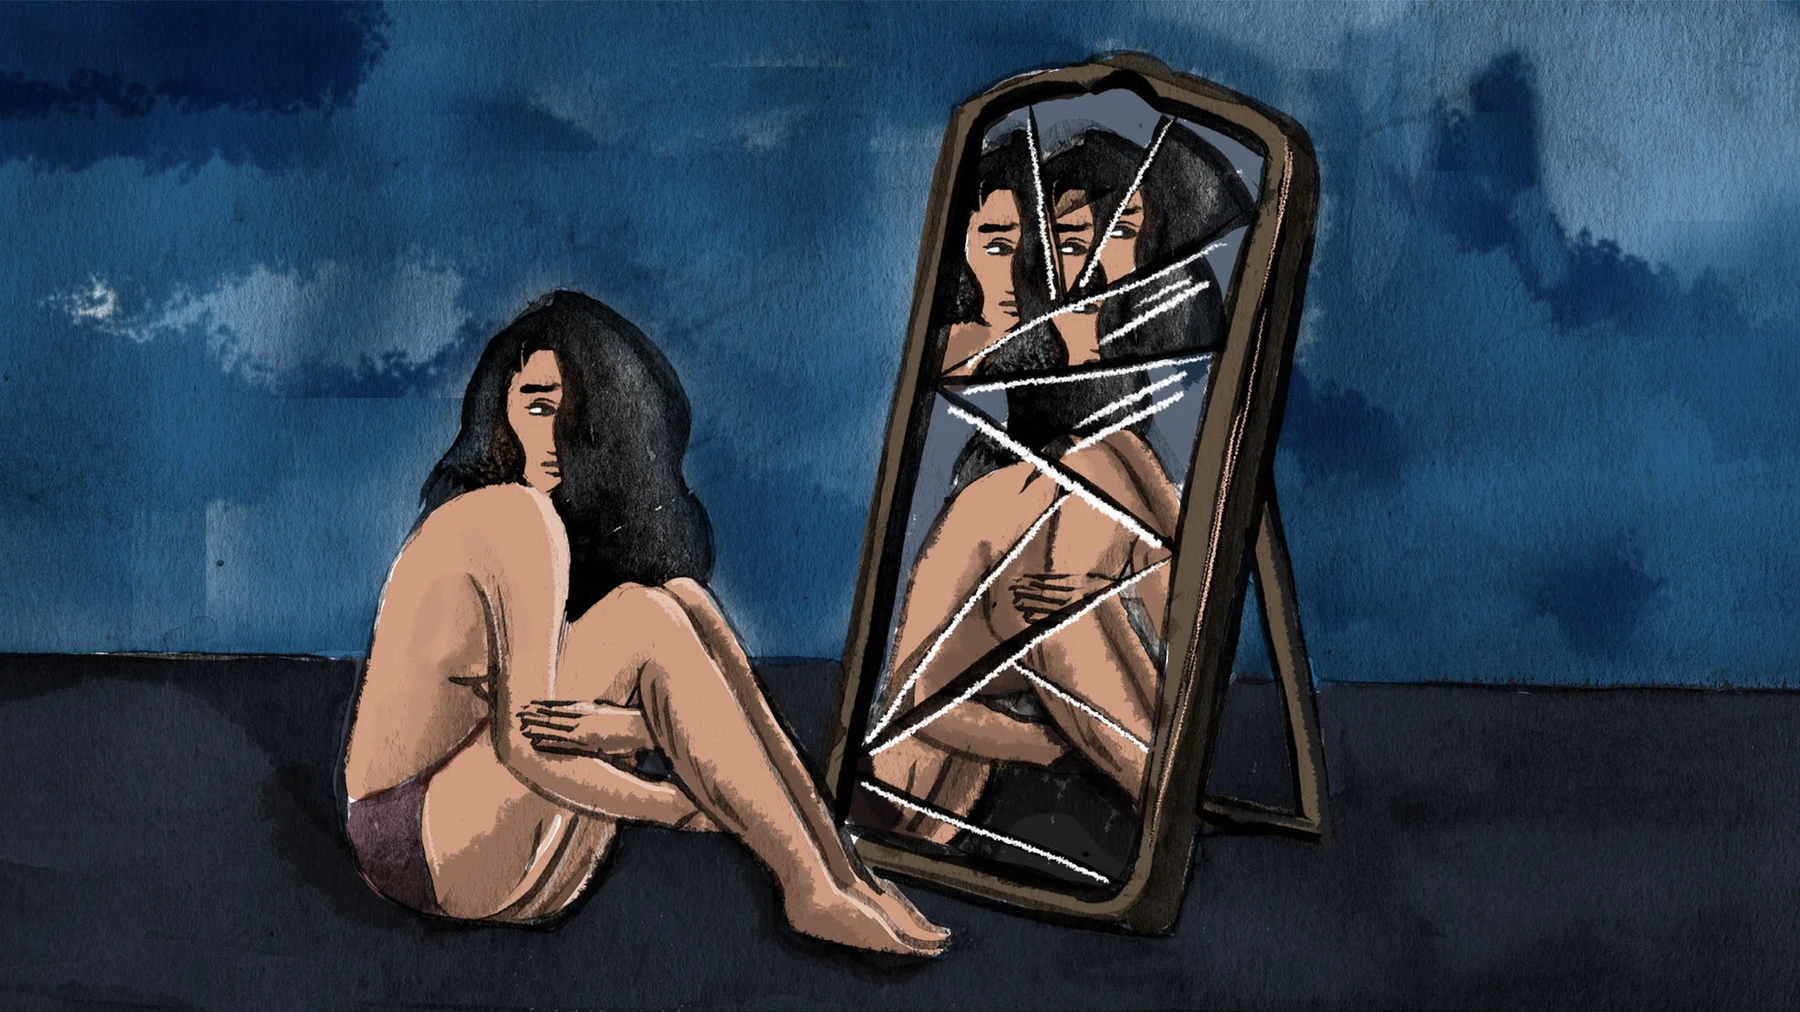 Drawing of a young woman in just underwear sitting and holding her knees in front of a shattered mirror